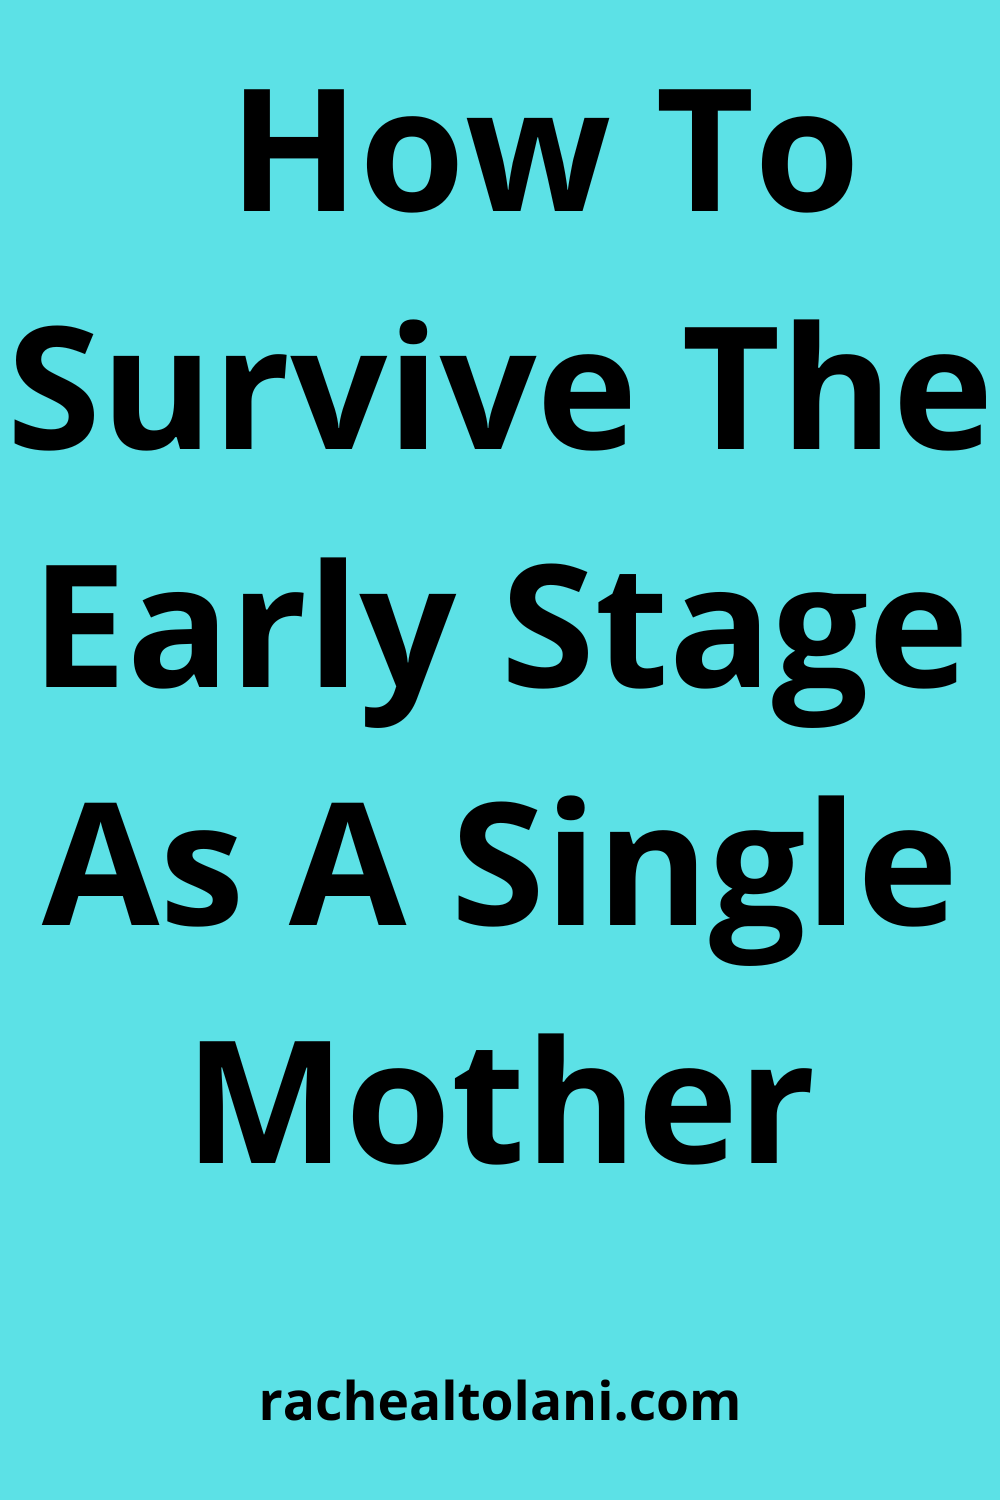 How to survive the early stage as a single mother